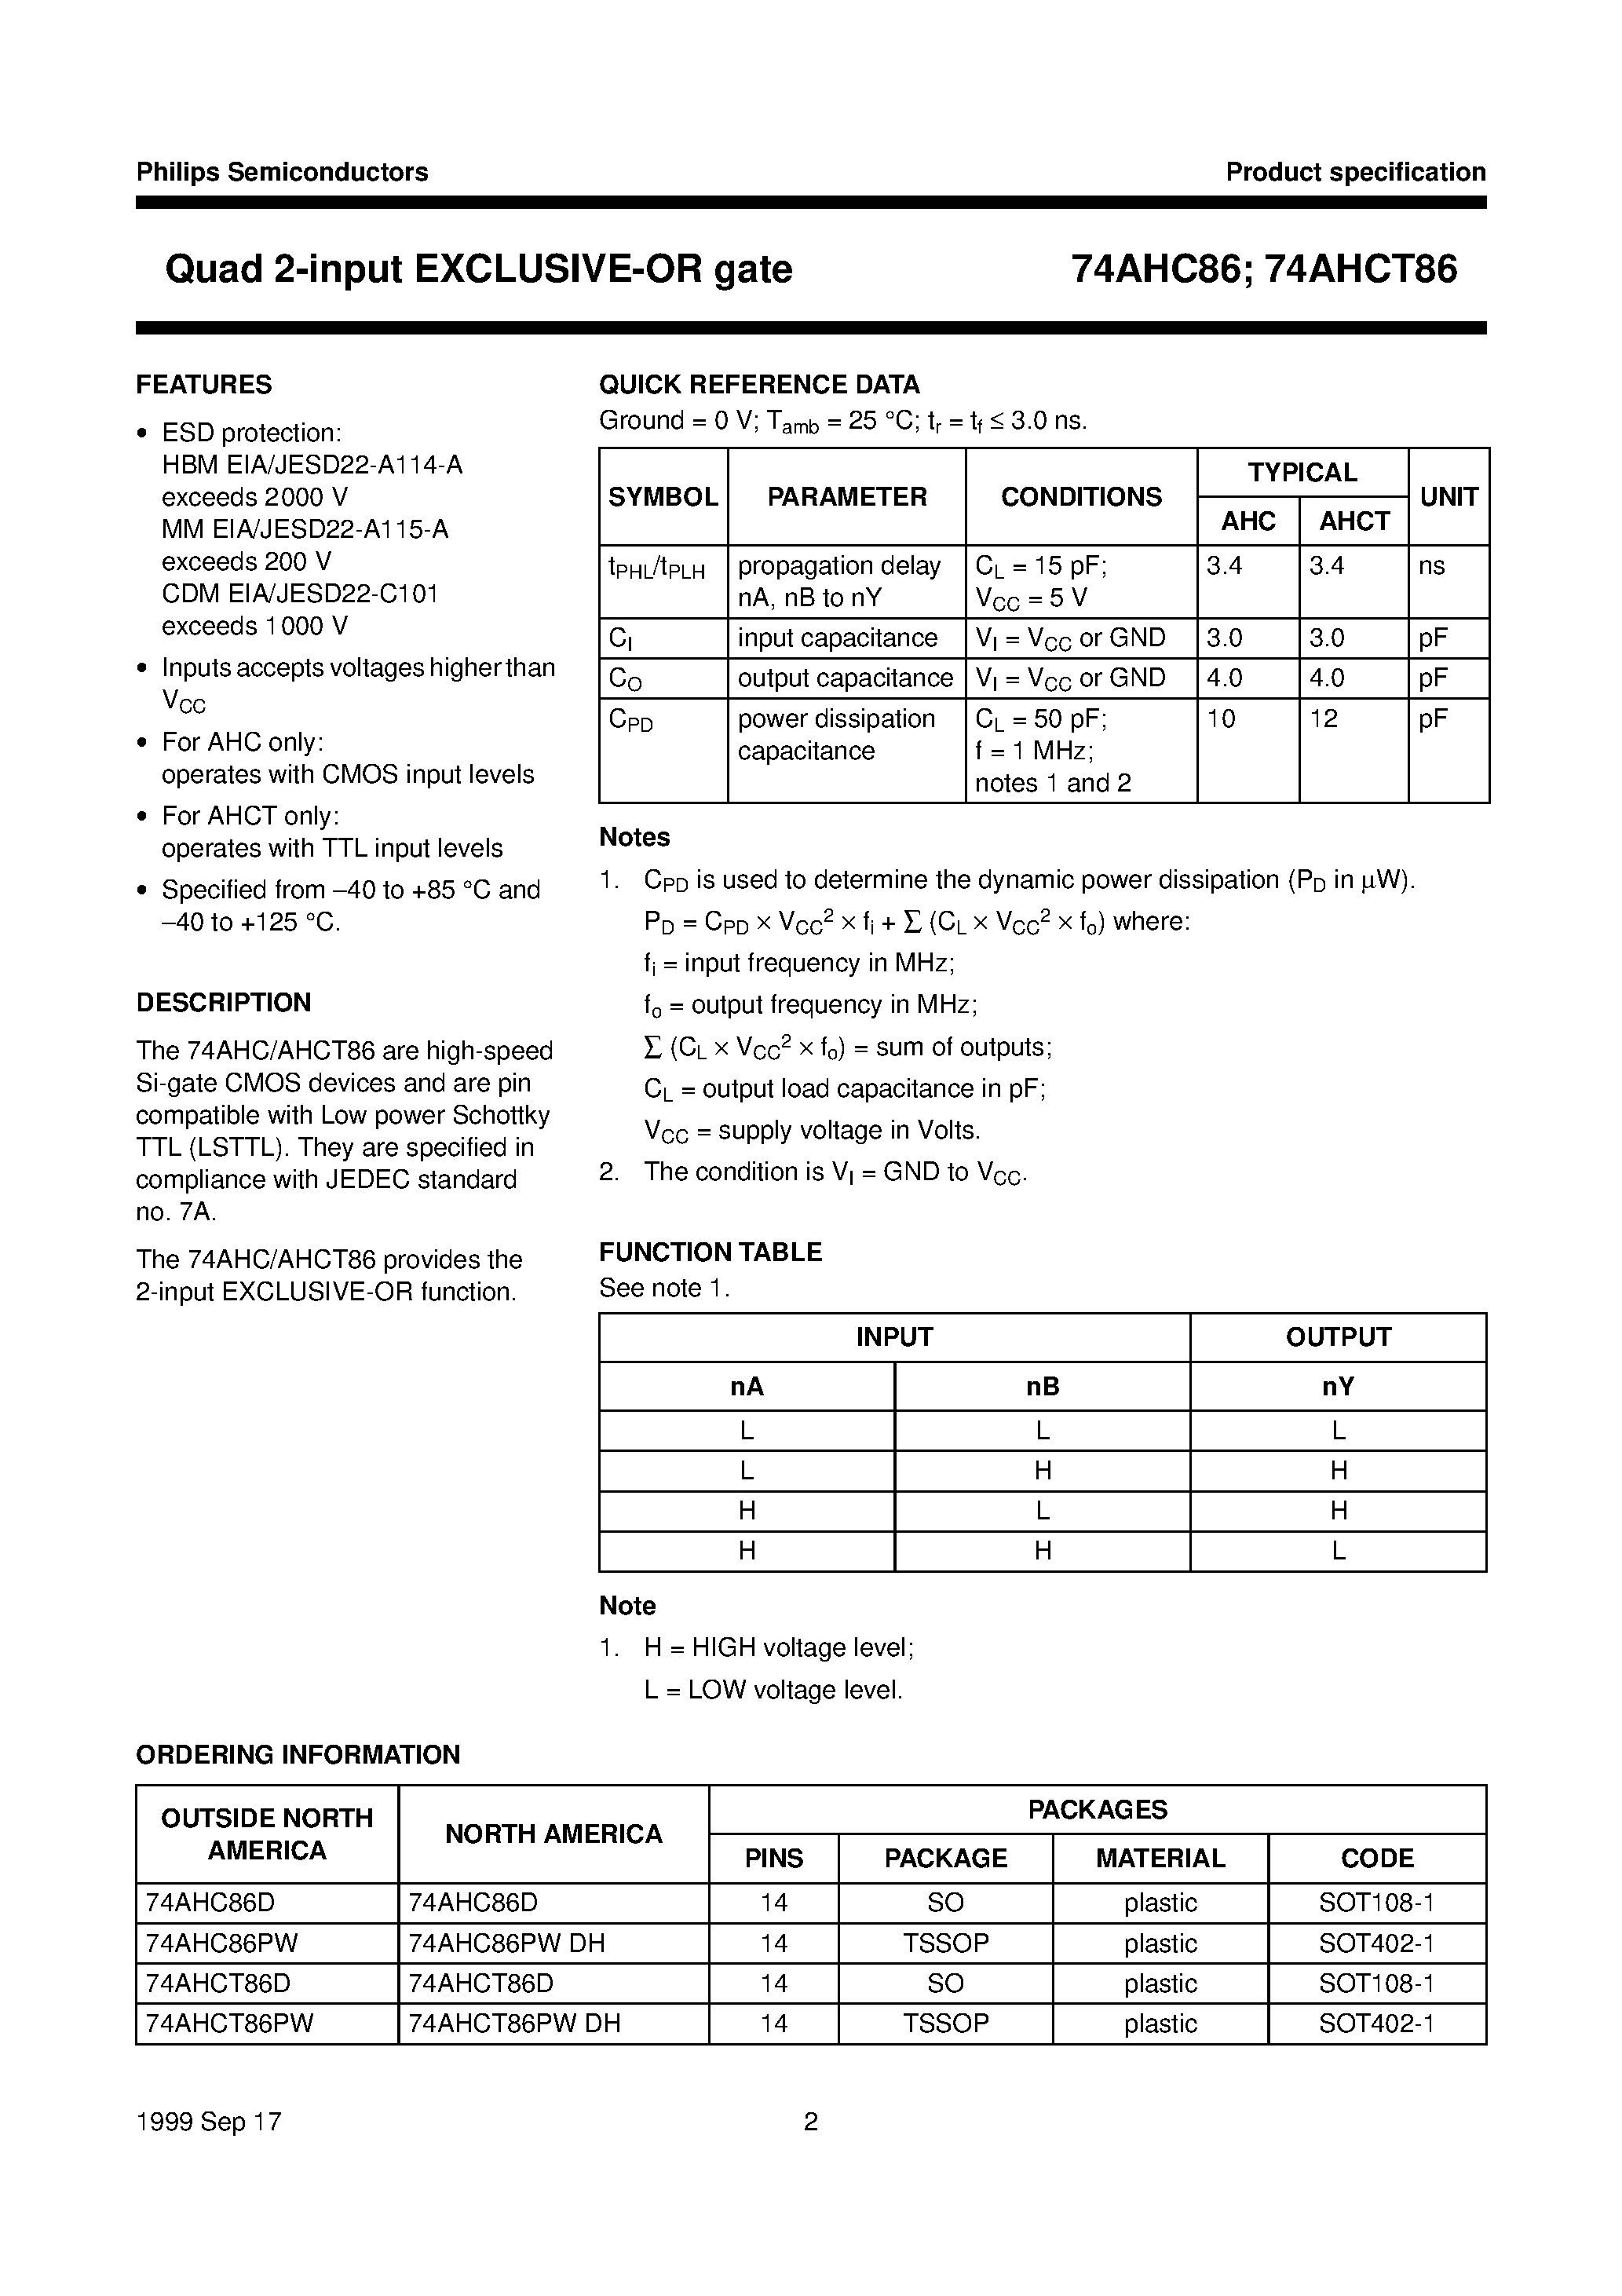 Datasheet 74AHCT86PWDH - Quad 2-input EXCLUSIVE-OR gate page 2